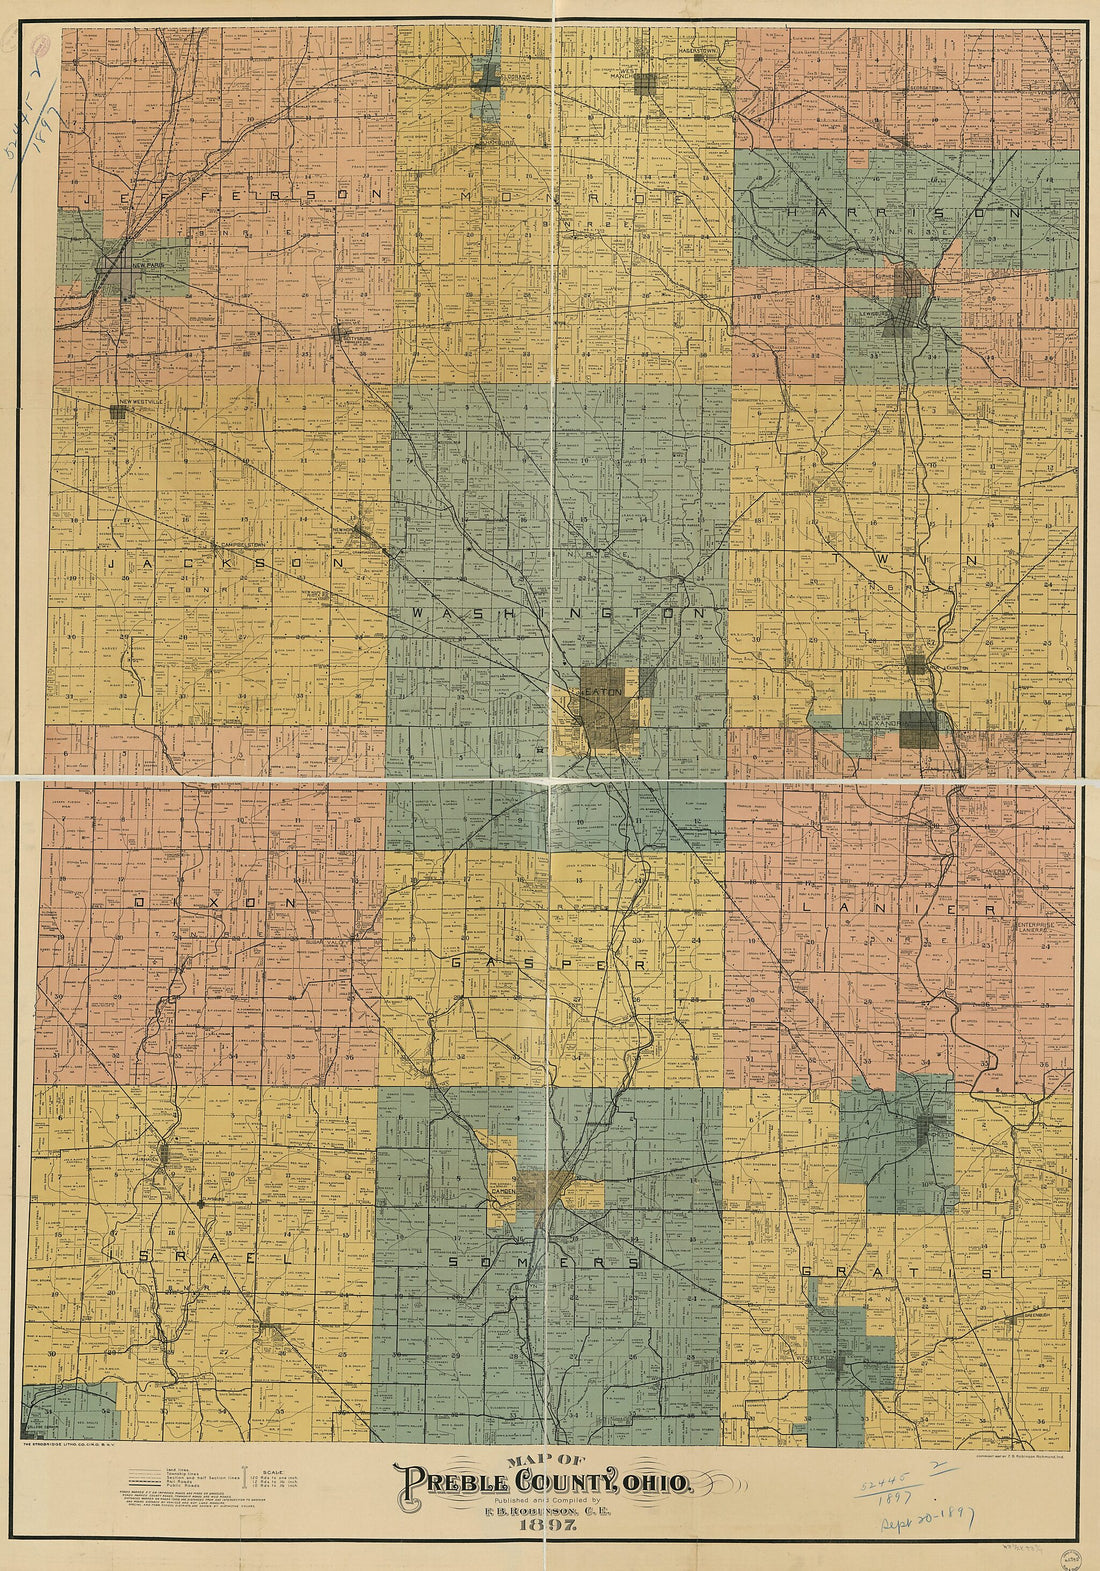 This old map of Map of Preble County, Ohio from 1897 was created by F. B. Robinson in 1897